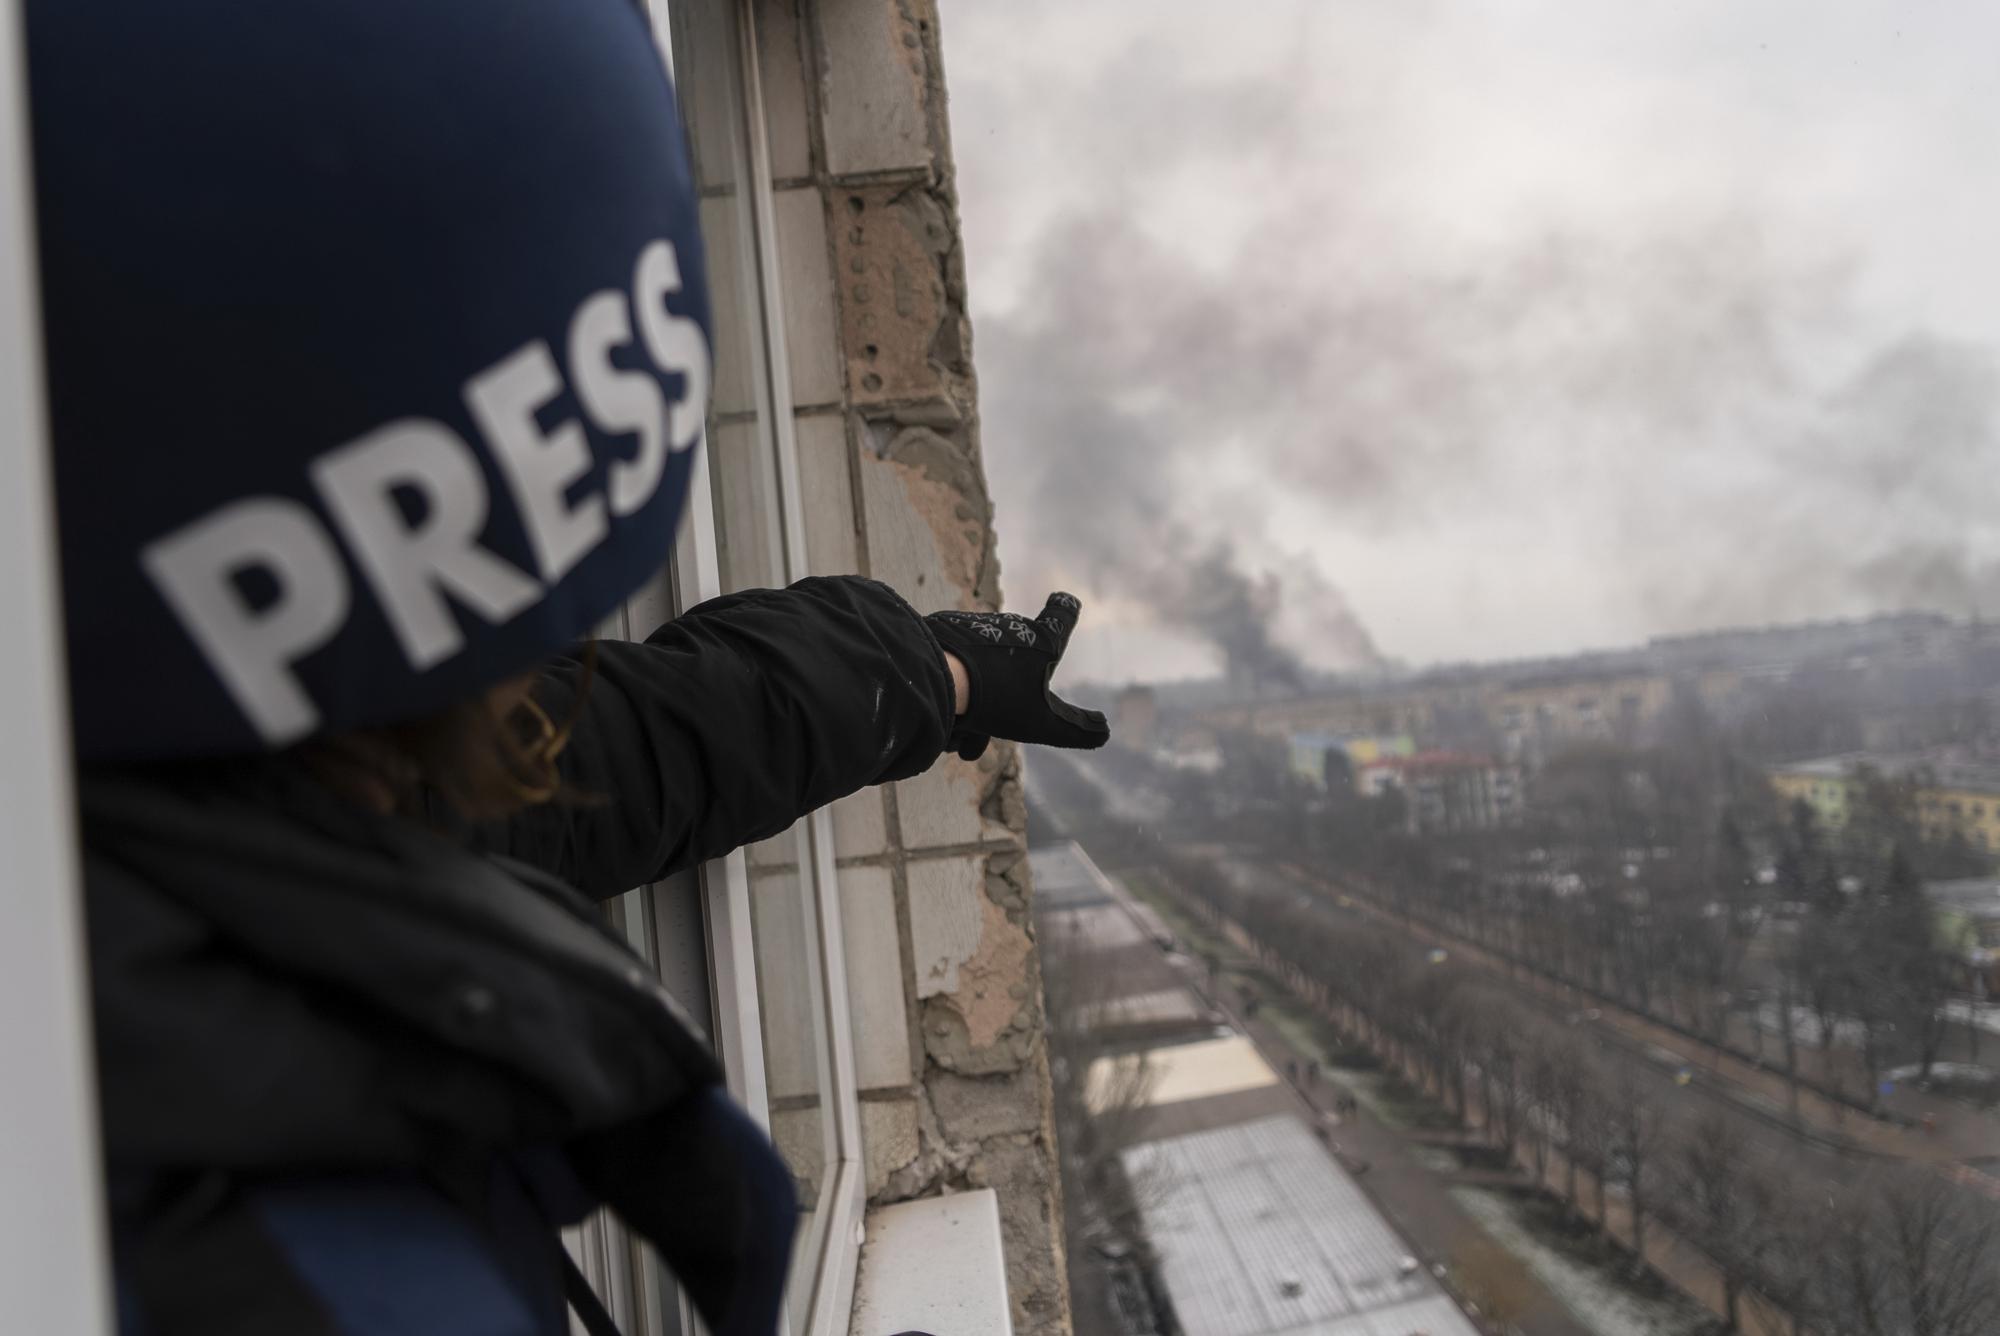 Associated Press photographer Evgeniy Maloletka points at the smoke rising after an airstrike on a maternity hospital, in Mariupol, Ukraine, Wednesday, March 9, 2022. (AP Photo/Mstyslav Chernov)